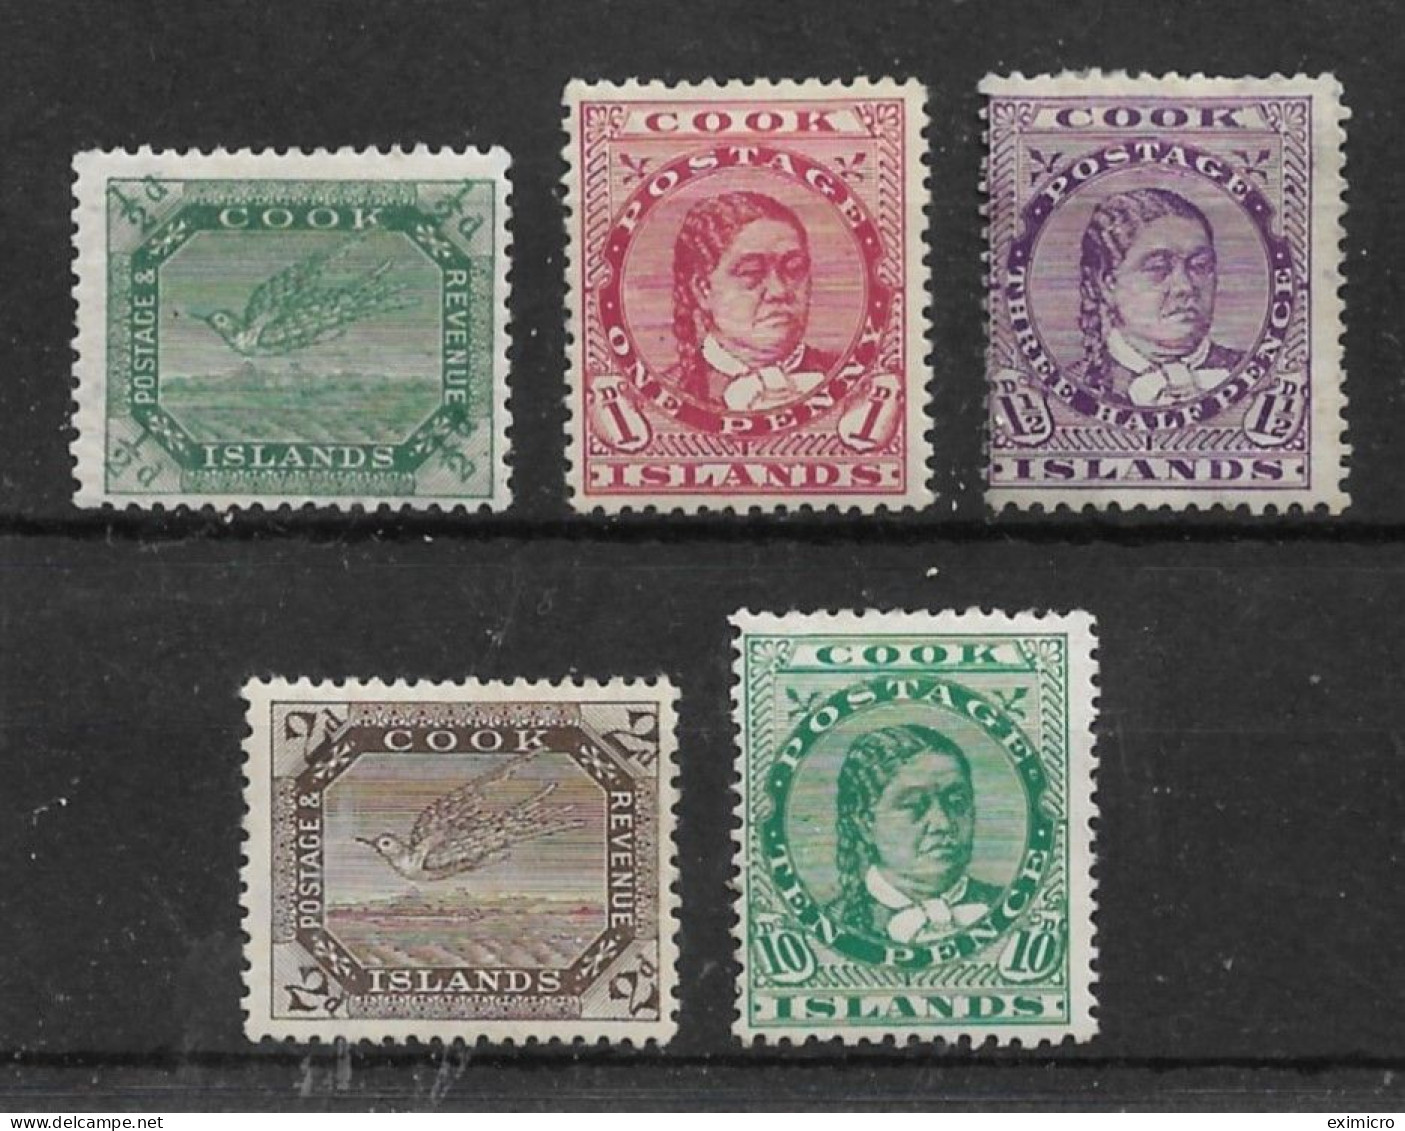 COOK ISLANDS 1913 - 1919 VALUES TO 10d SG 39a, 41, 43, 44, 45 MOUNTED MINT Cat £96 - Cook Islands